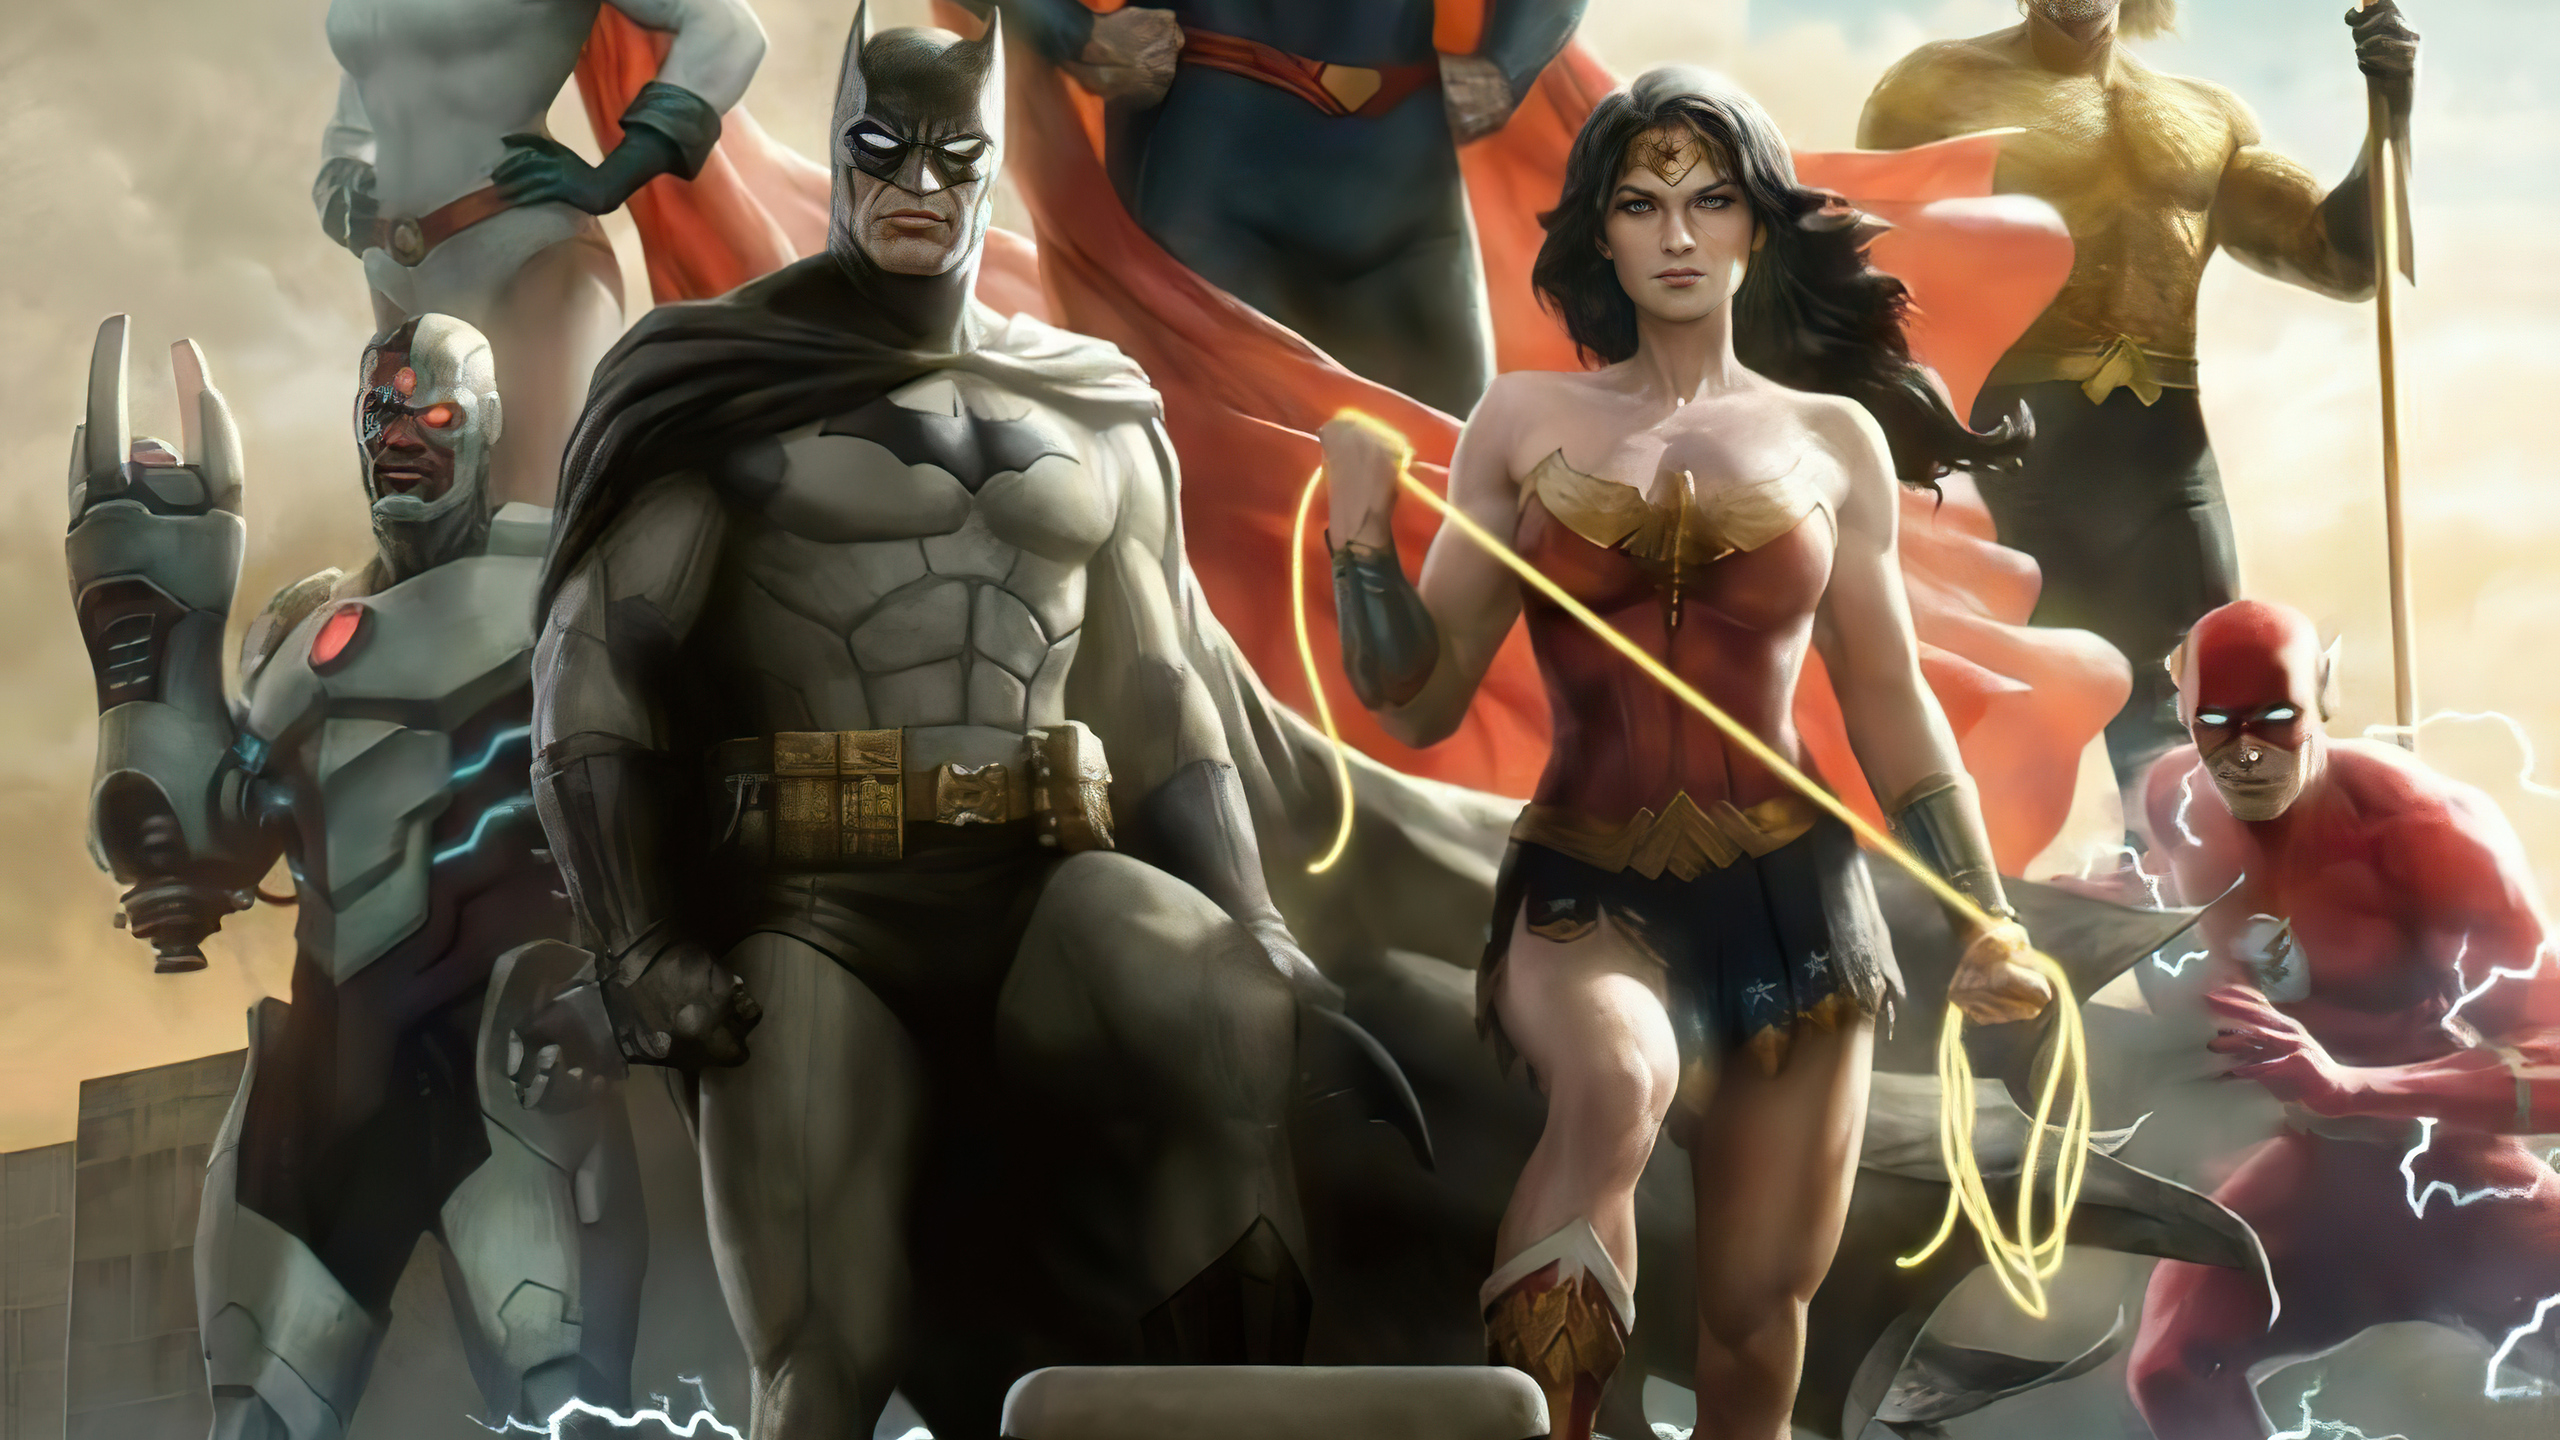 Cool Justice League Illustration Wallpapers